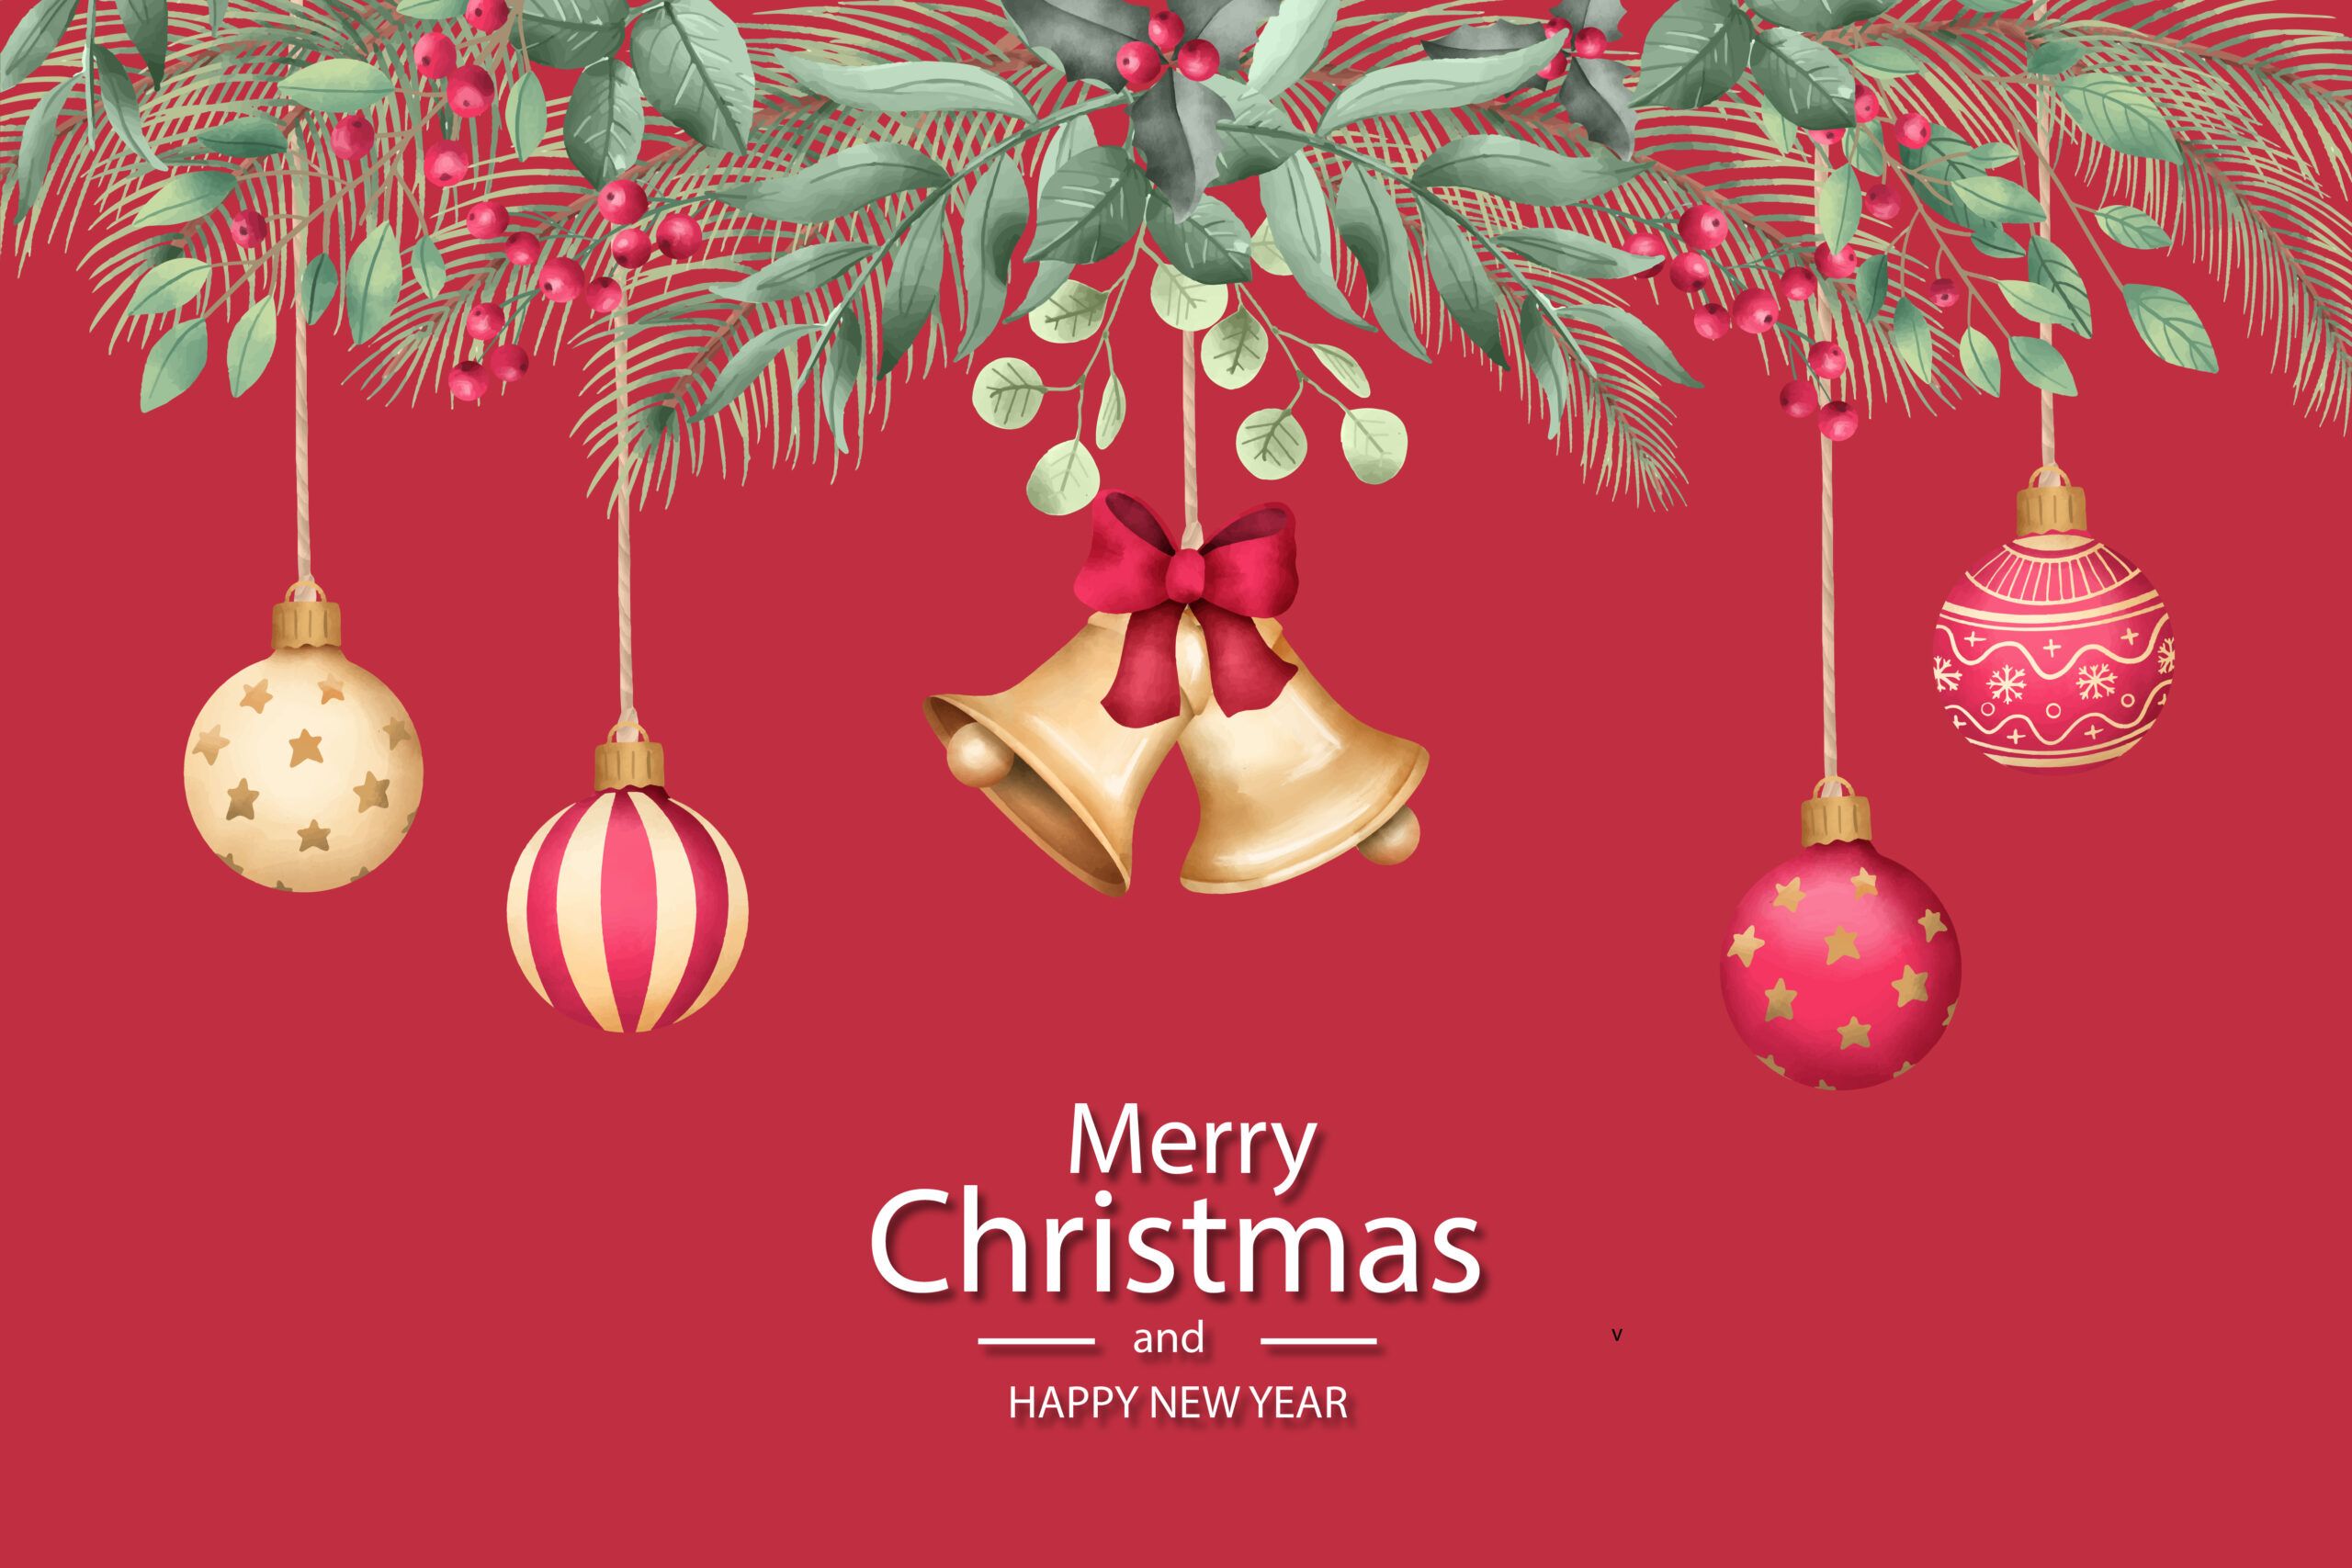 Merry Christmas and New Year 2021 Image